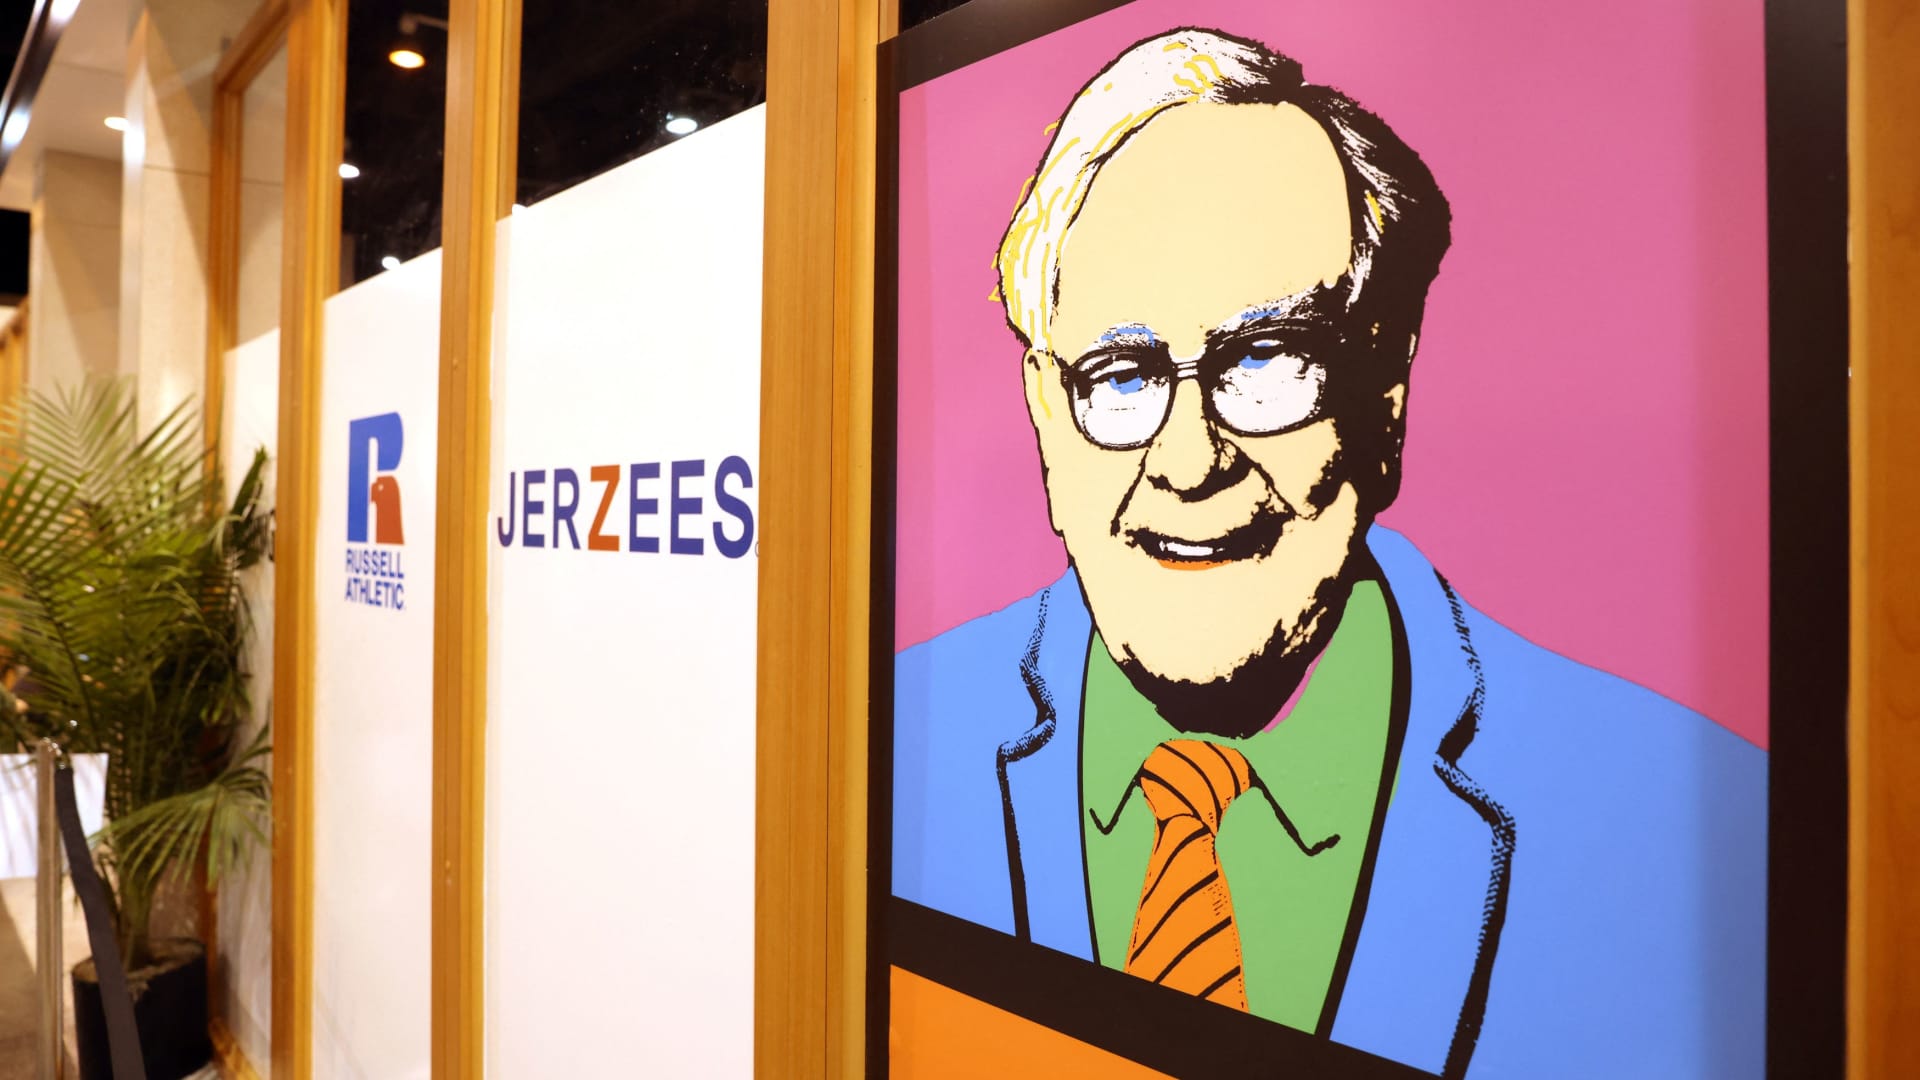 Hedge funds have a new favorite stock and it’s Warren Buffett’s Berkshire Hathaway